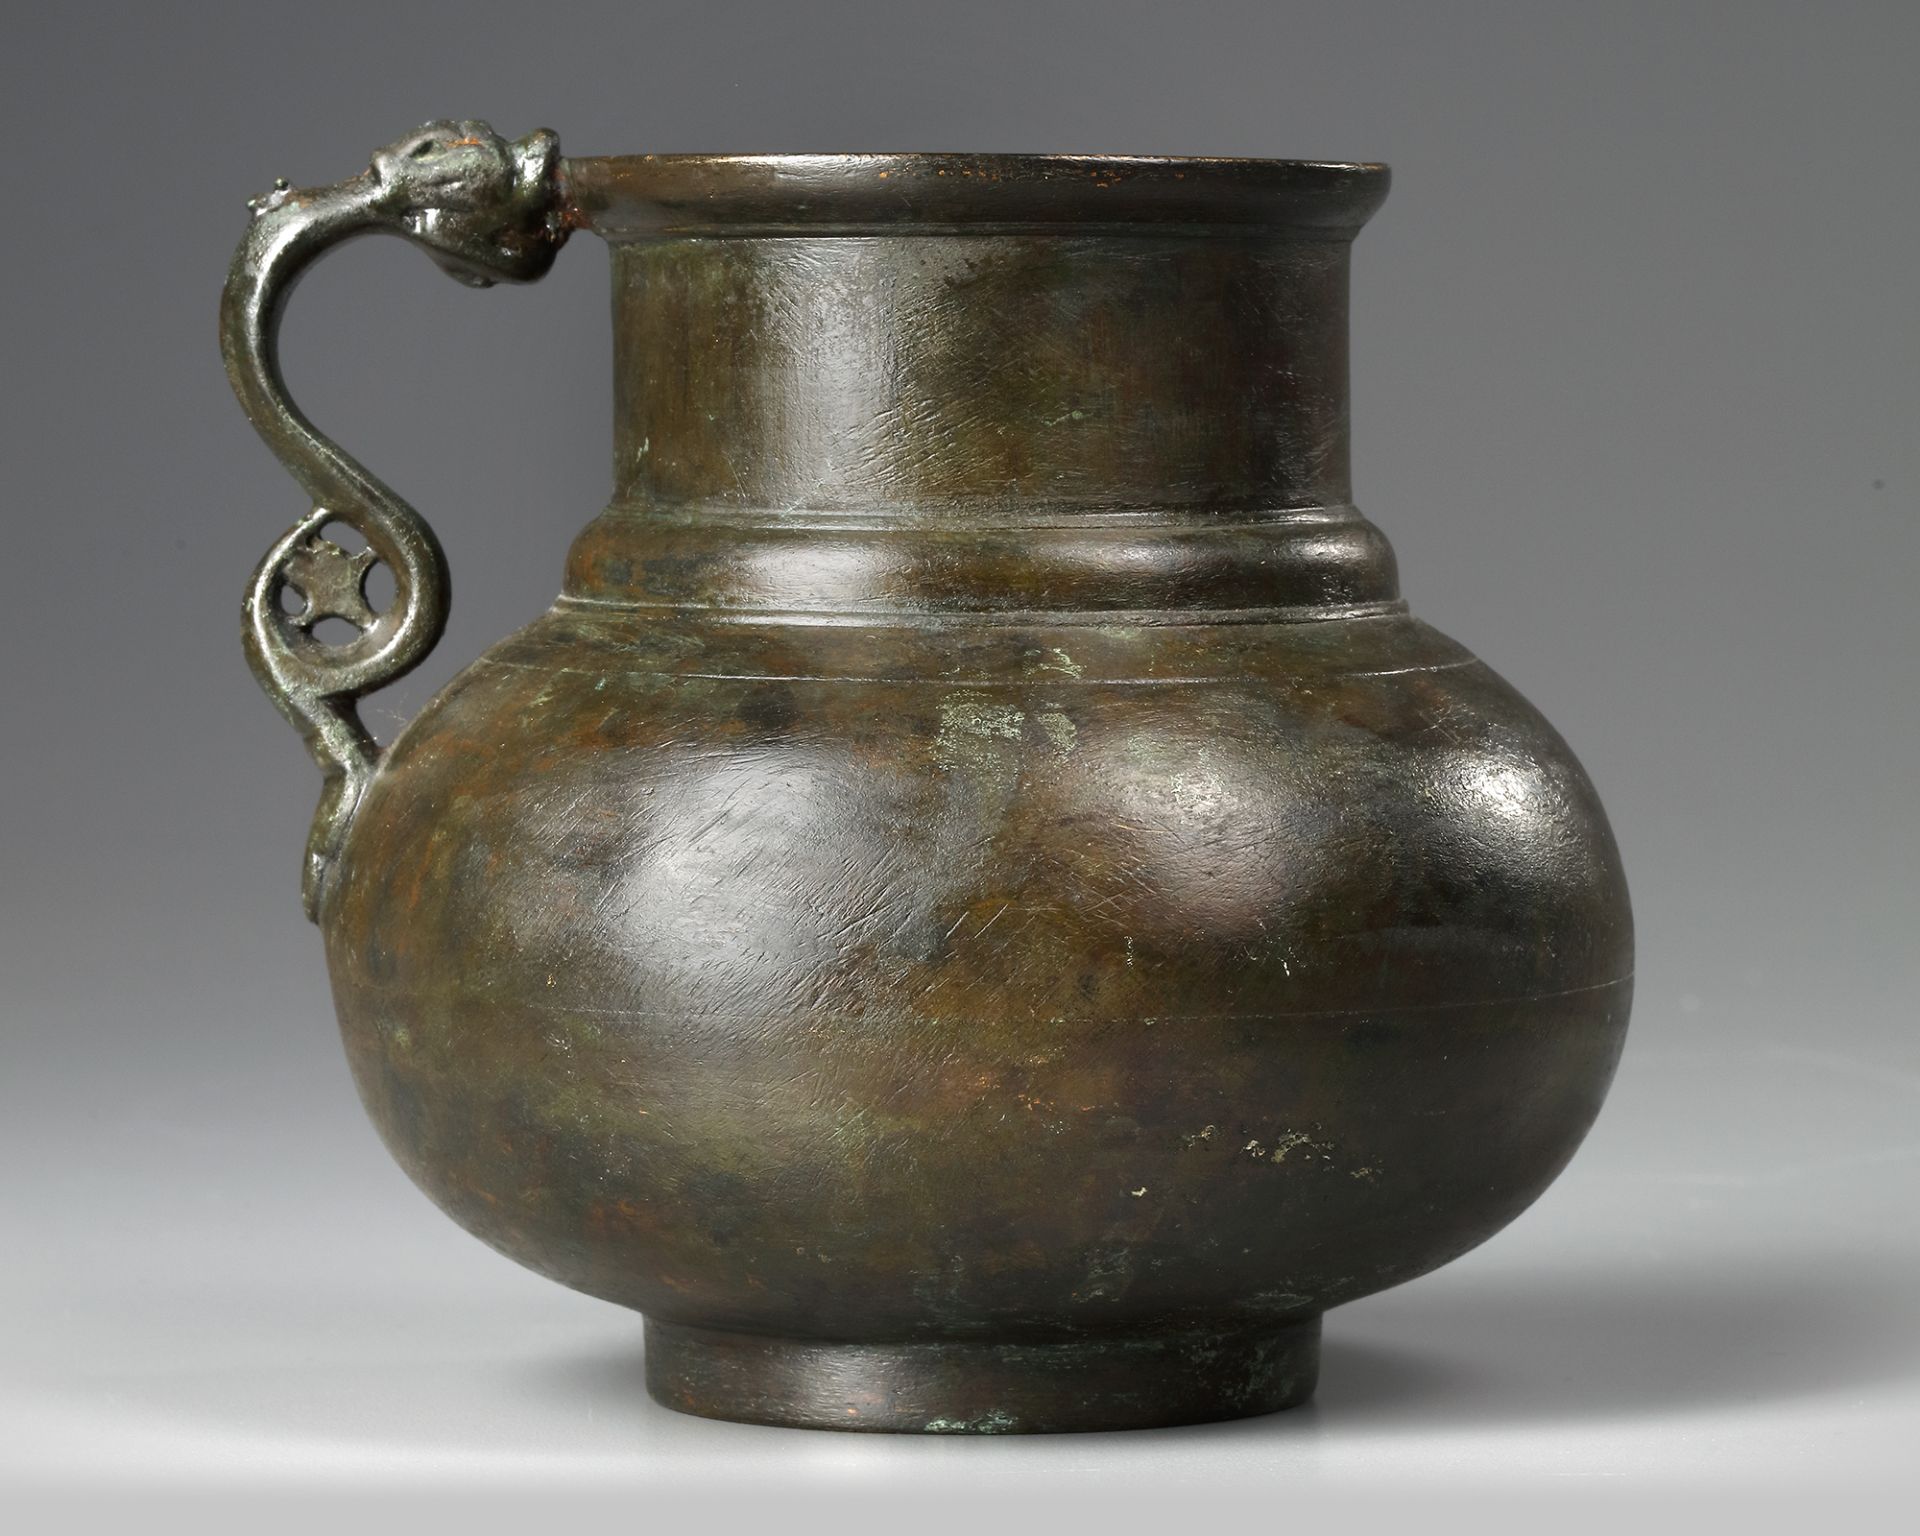 A TIMURID DRAGON-HANDLED JUG, CENTRAL ASIA, LATE 14TH- EARLY 15TH CENTURY - Image 3 of 6